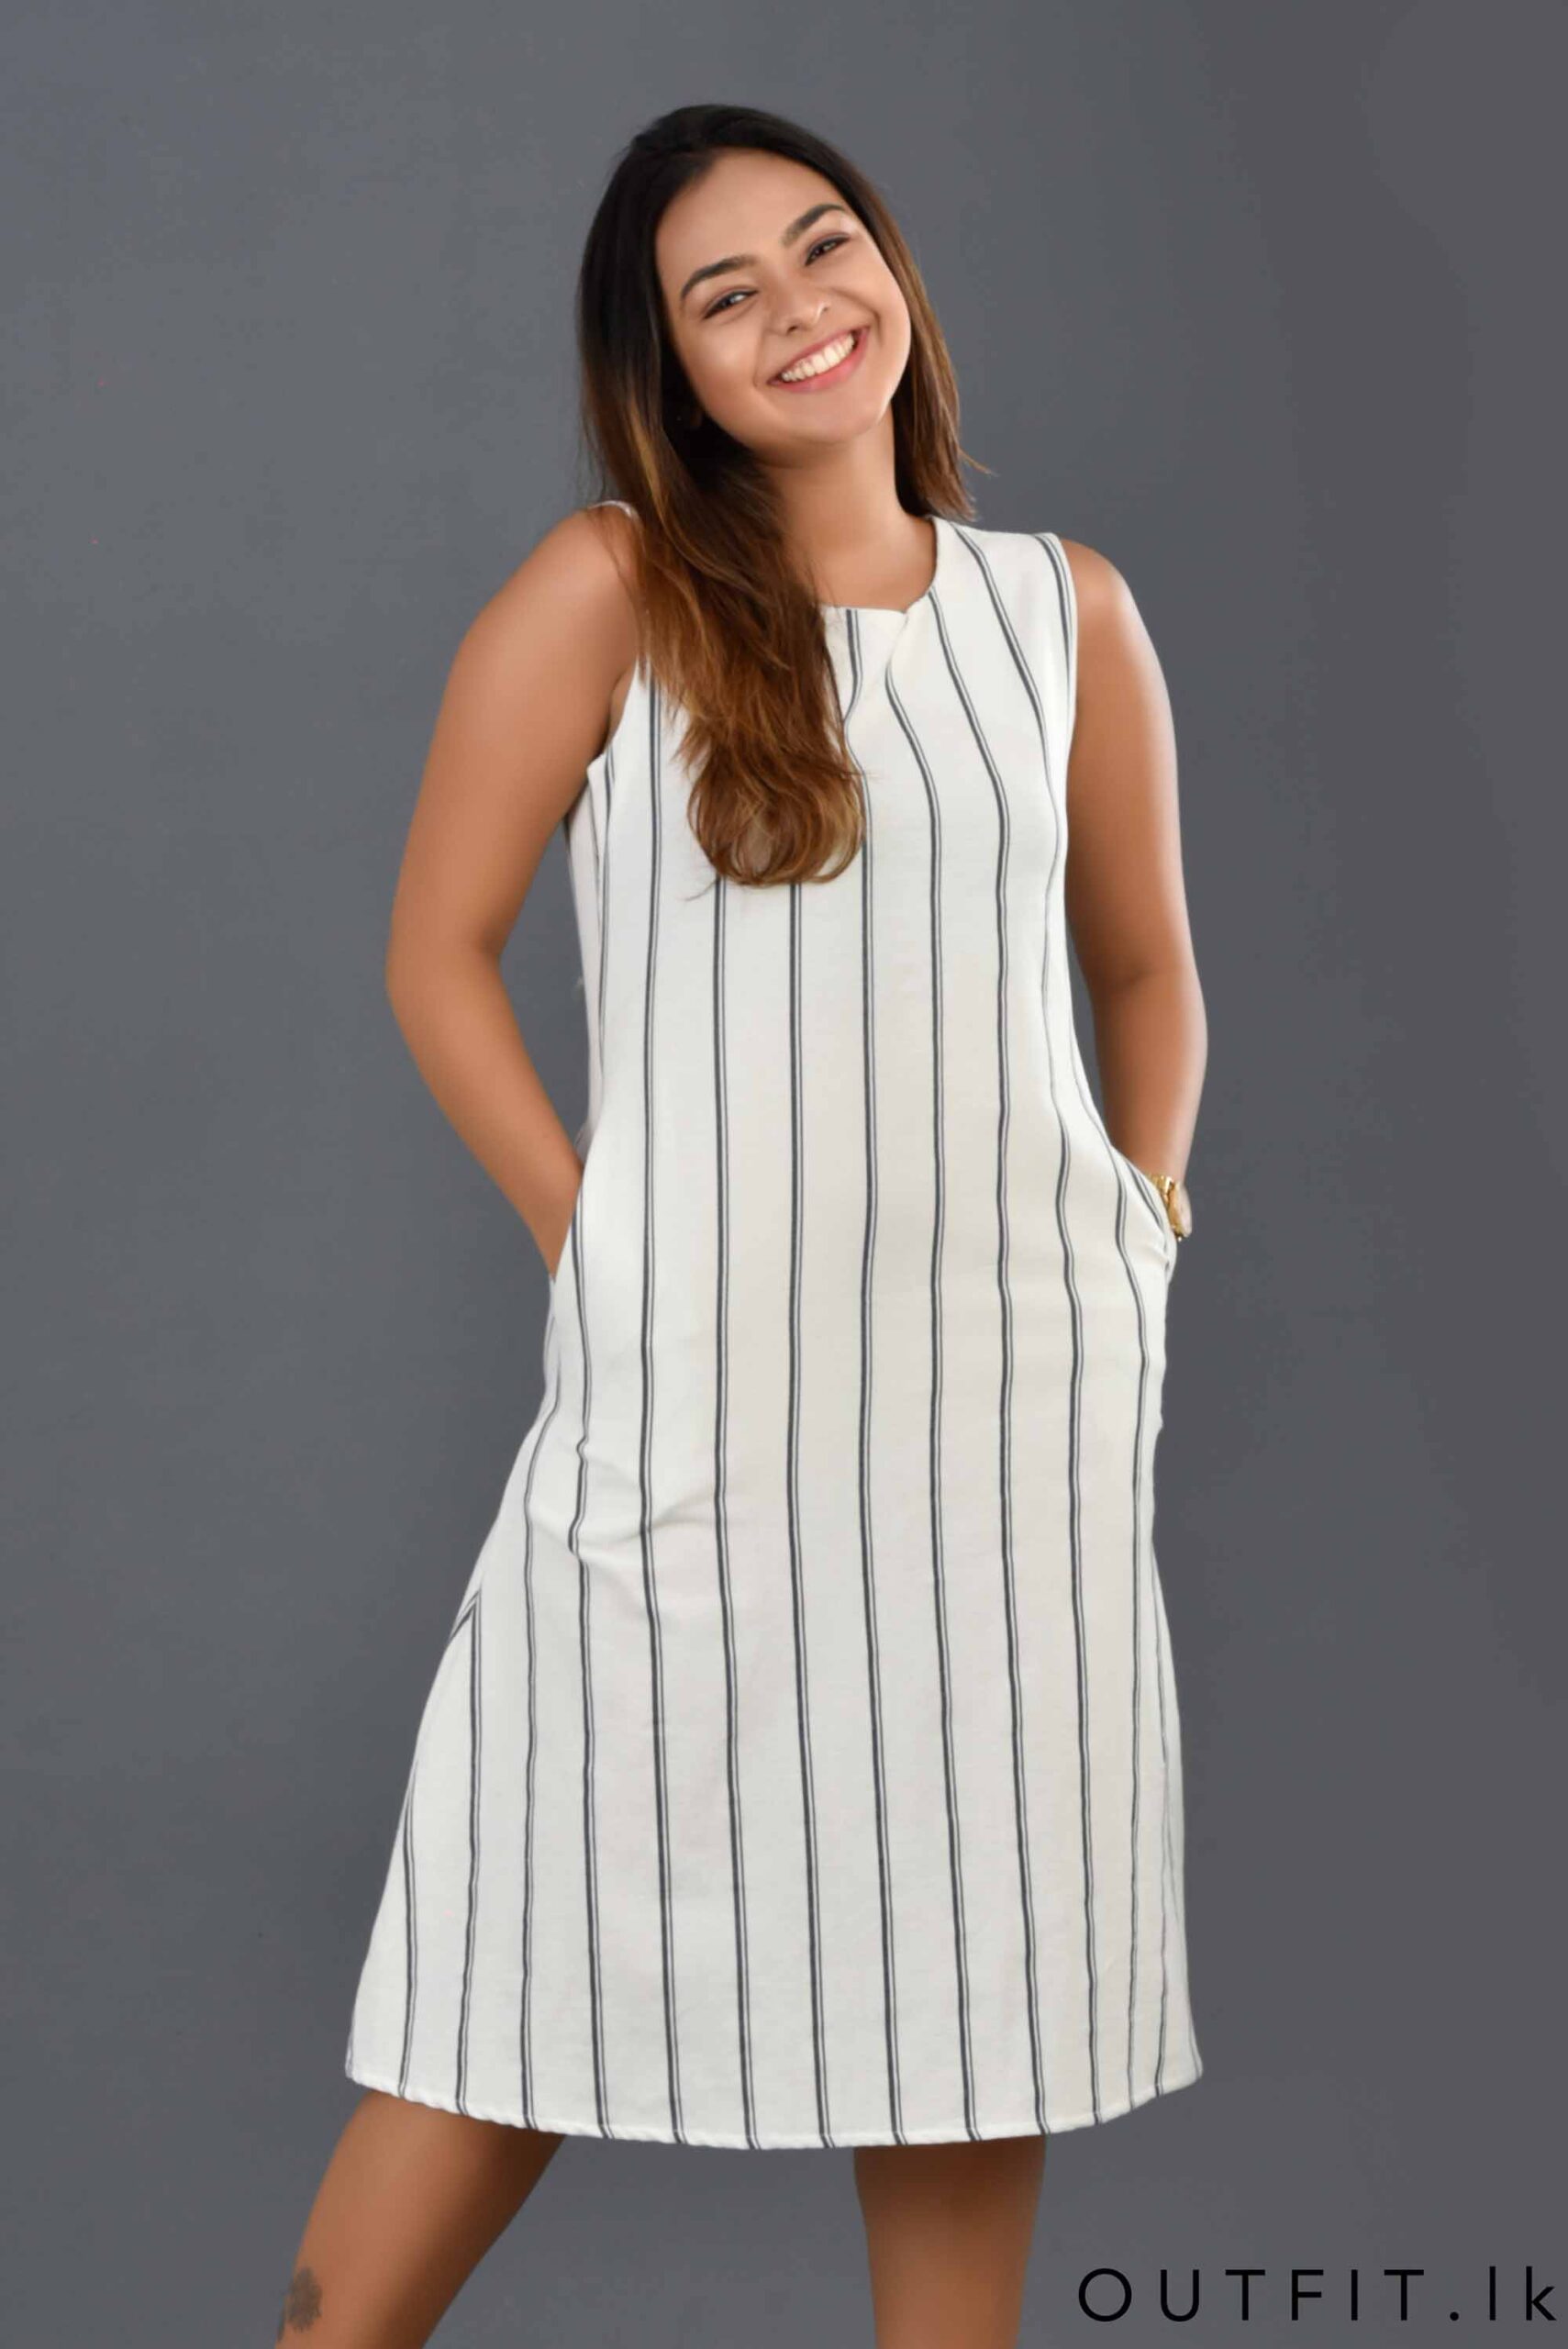 Striped Casual Linen Dress - OUTFIT.lk